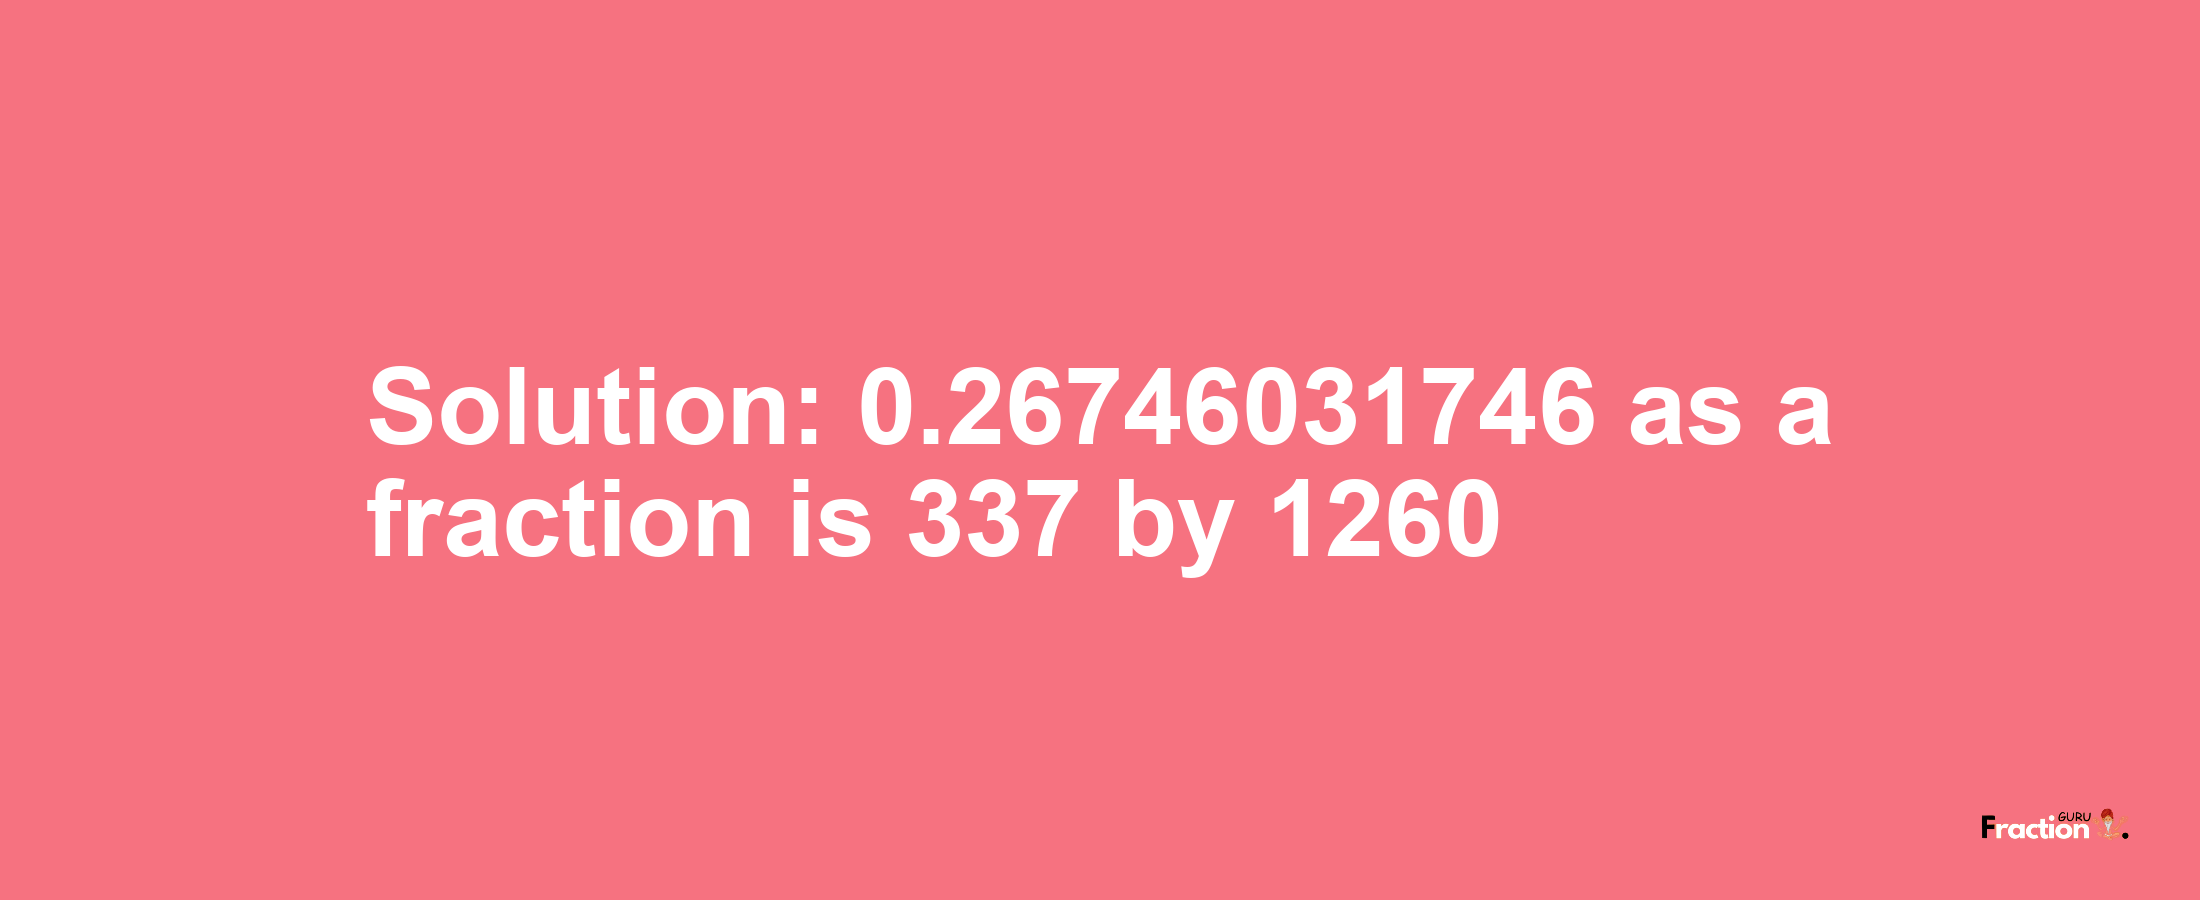 Solution:0.26746031746 as a fraction is 337/1260